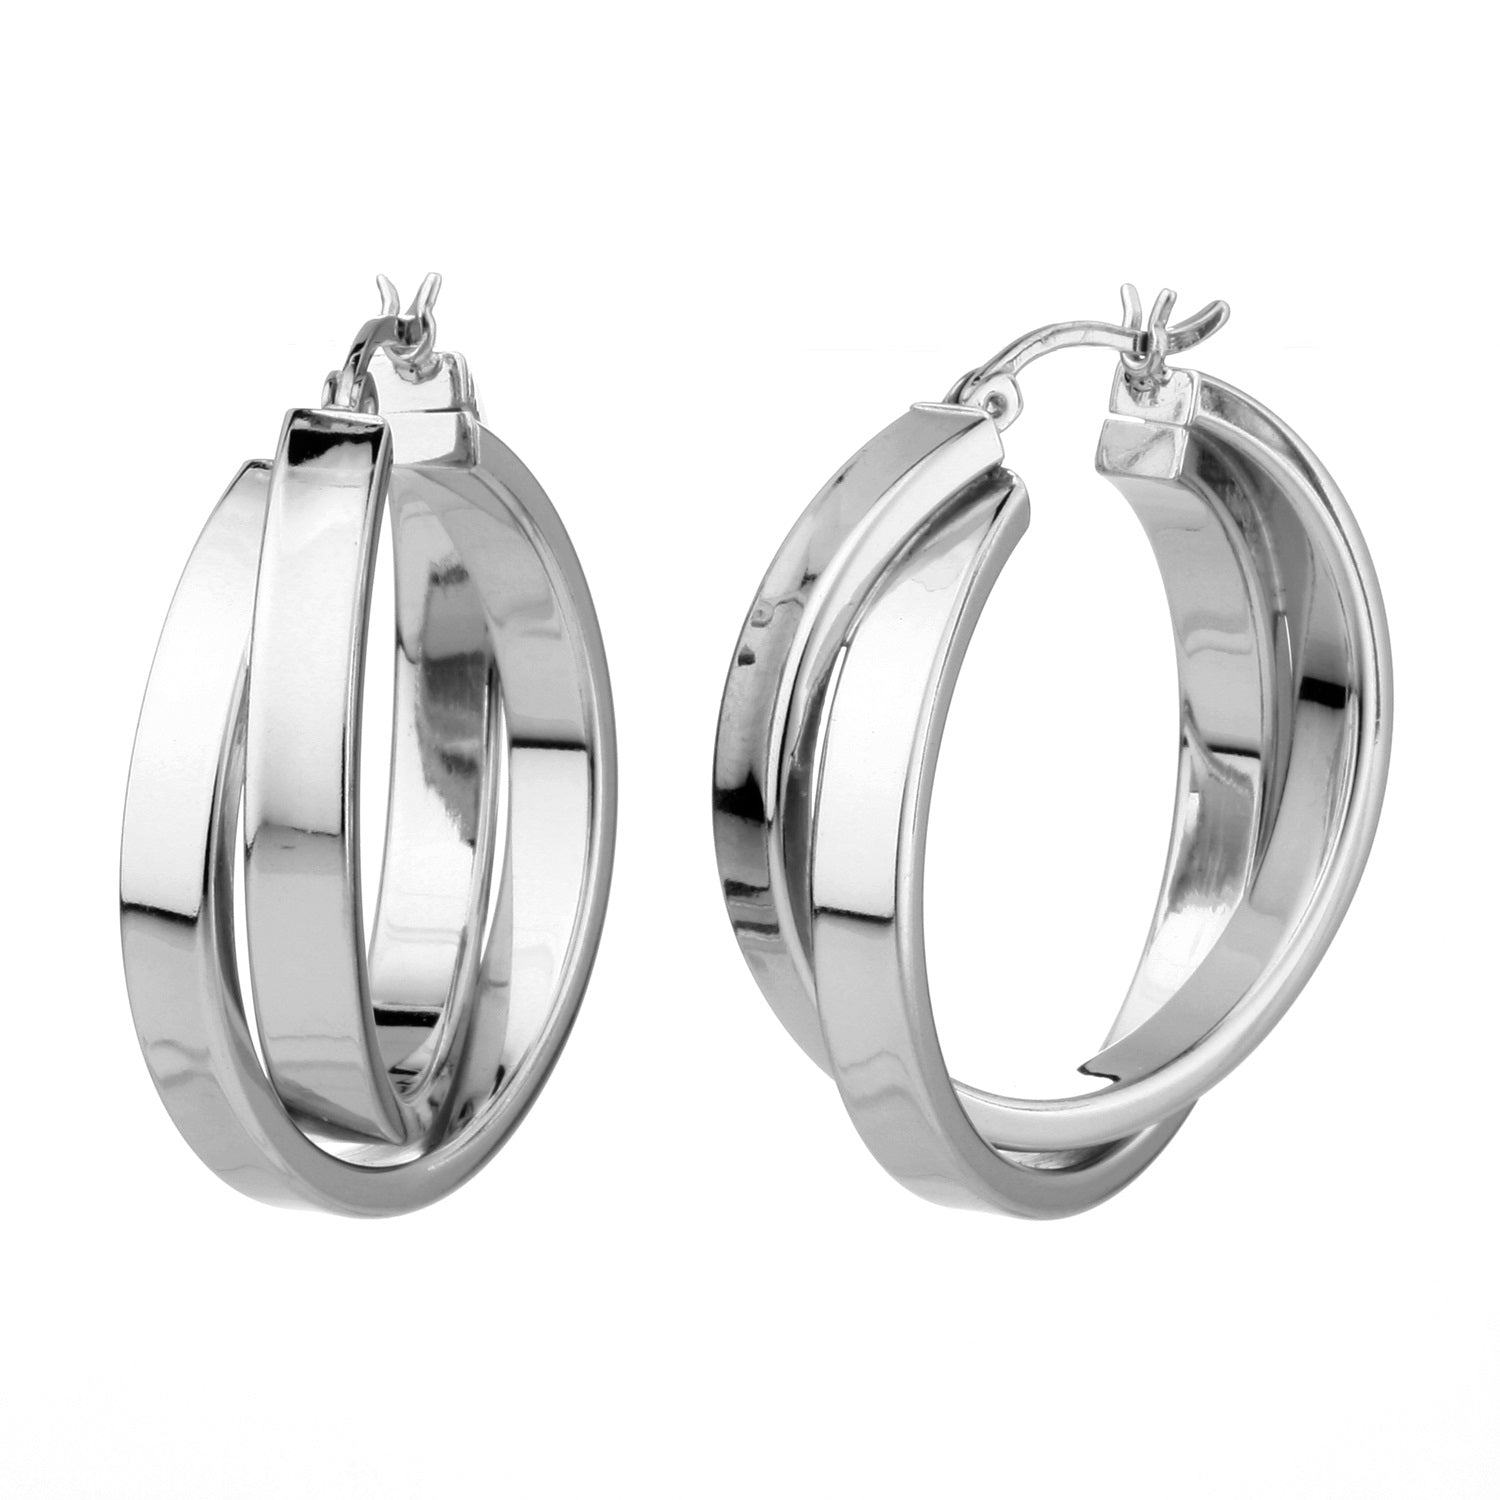 925 STERLING SILVER 30.0 MM. CROSSOVER RECTANGLE ROUND SHAPE HOOP EARRINGS F4491